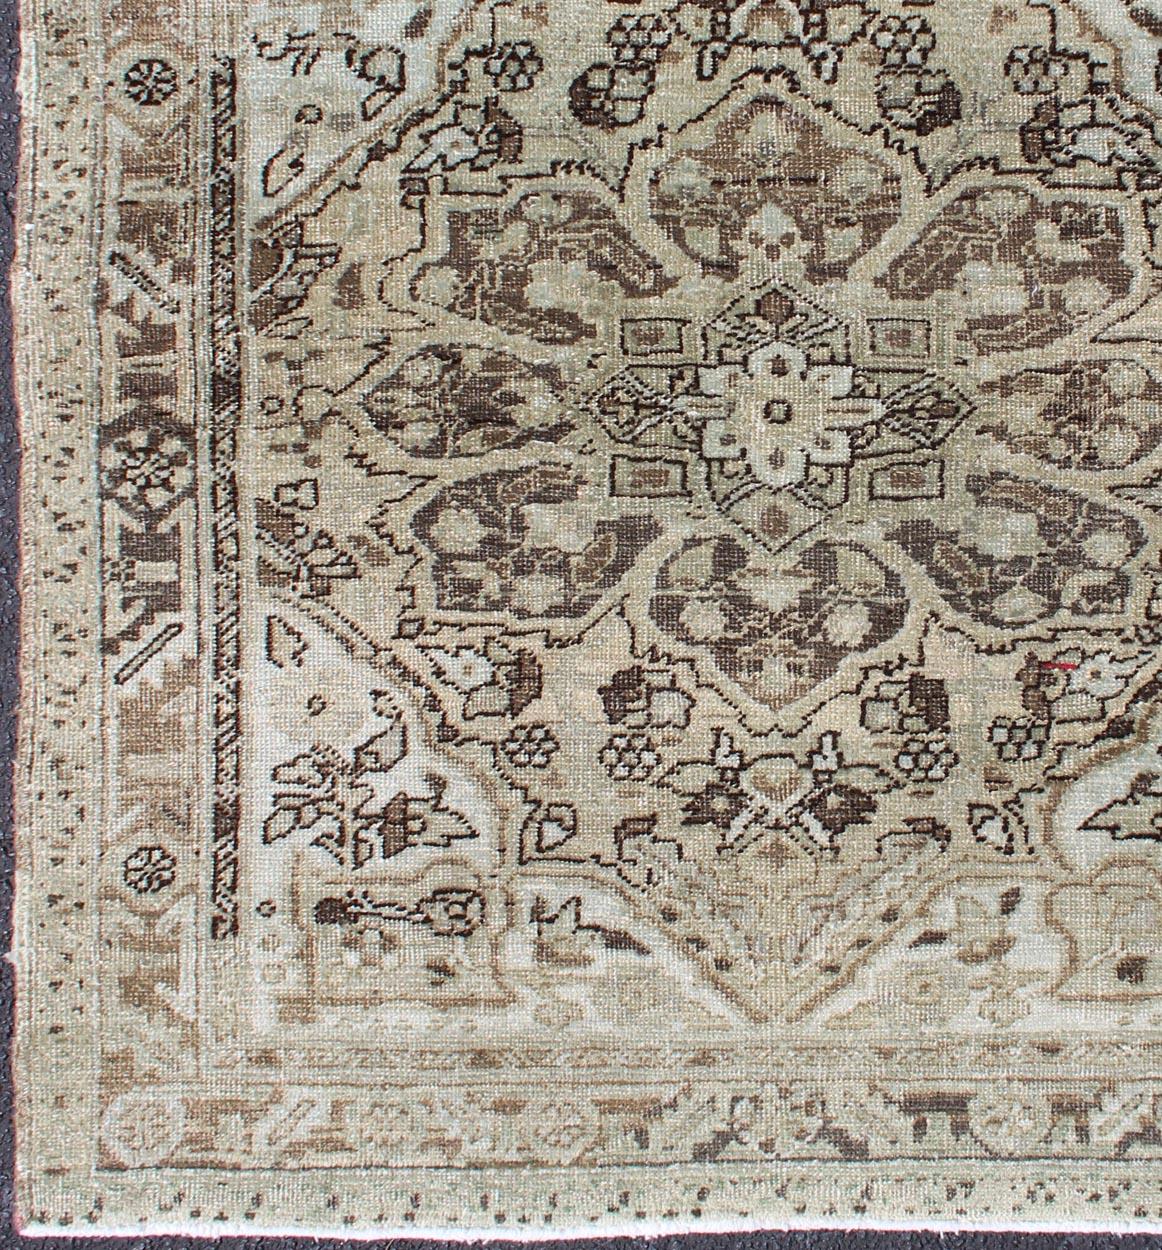 Vintage Persian carpet with Taupe, brown, ivory Medallion design, ca-13541, country of origin / type: Iran / Heriz, circa 1950

This nearly square-shaped Heriz carpet from midcentury Persia features an expansive layered medallion design in its